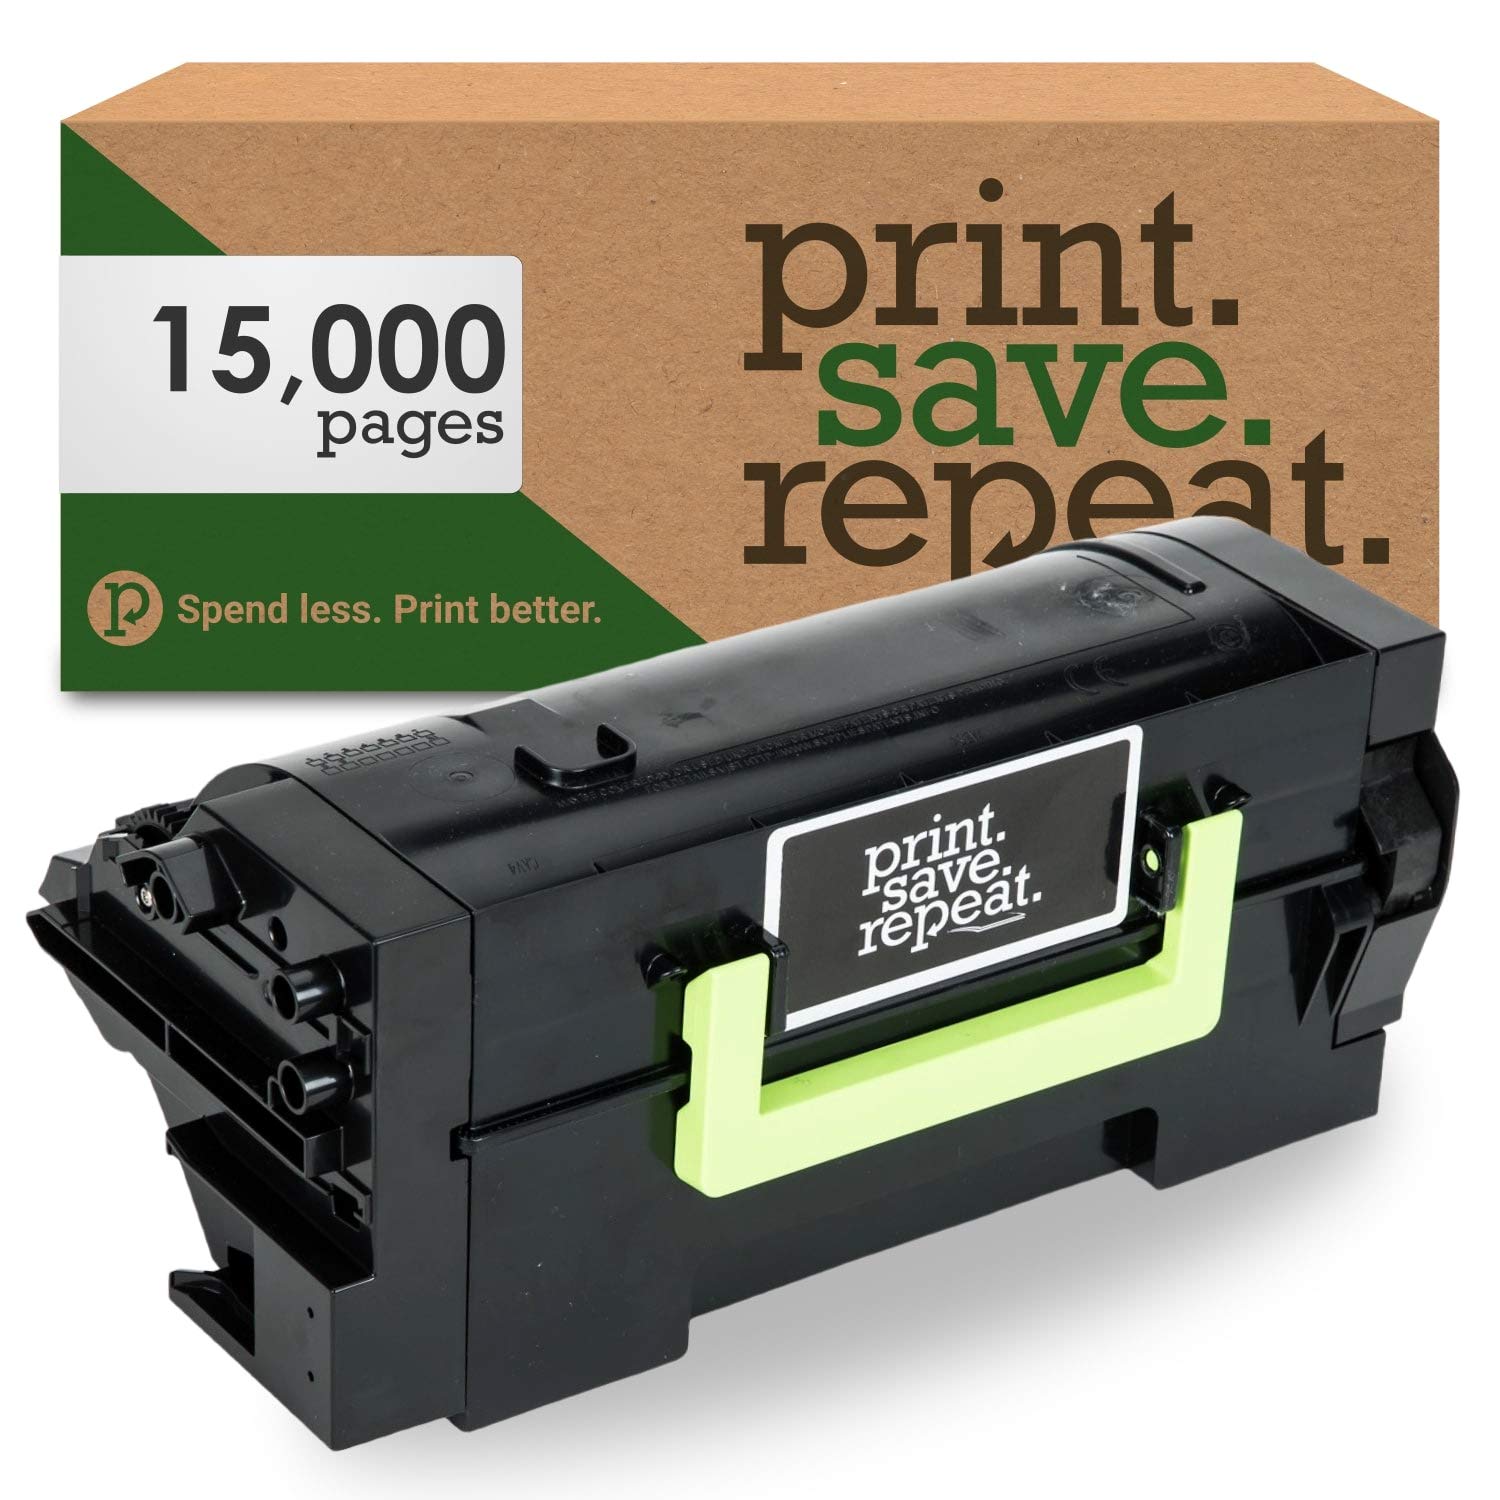 Print.Save.Repeat. Lexmark 58D1H00 High Yield Remanufactured Toner Cartridge for MS725, MS821, MS822, MS823, MS824, MS825, MS826, MX721, MX722, MX725, MX822, MX824, MX826 Laser Printer [15,000 Pages]